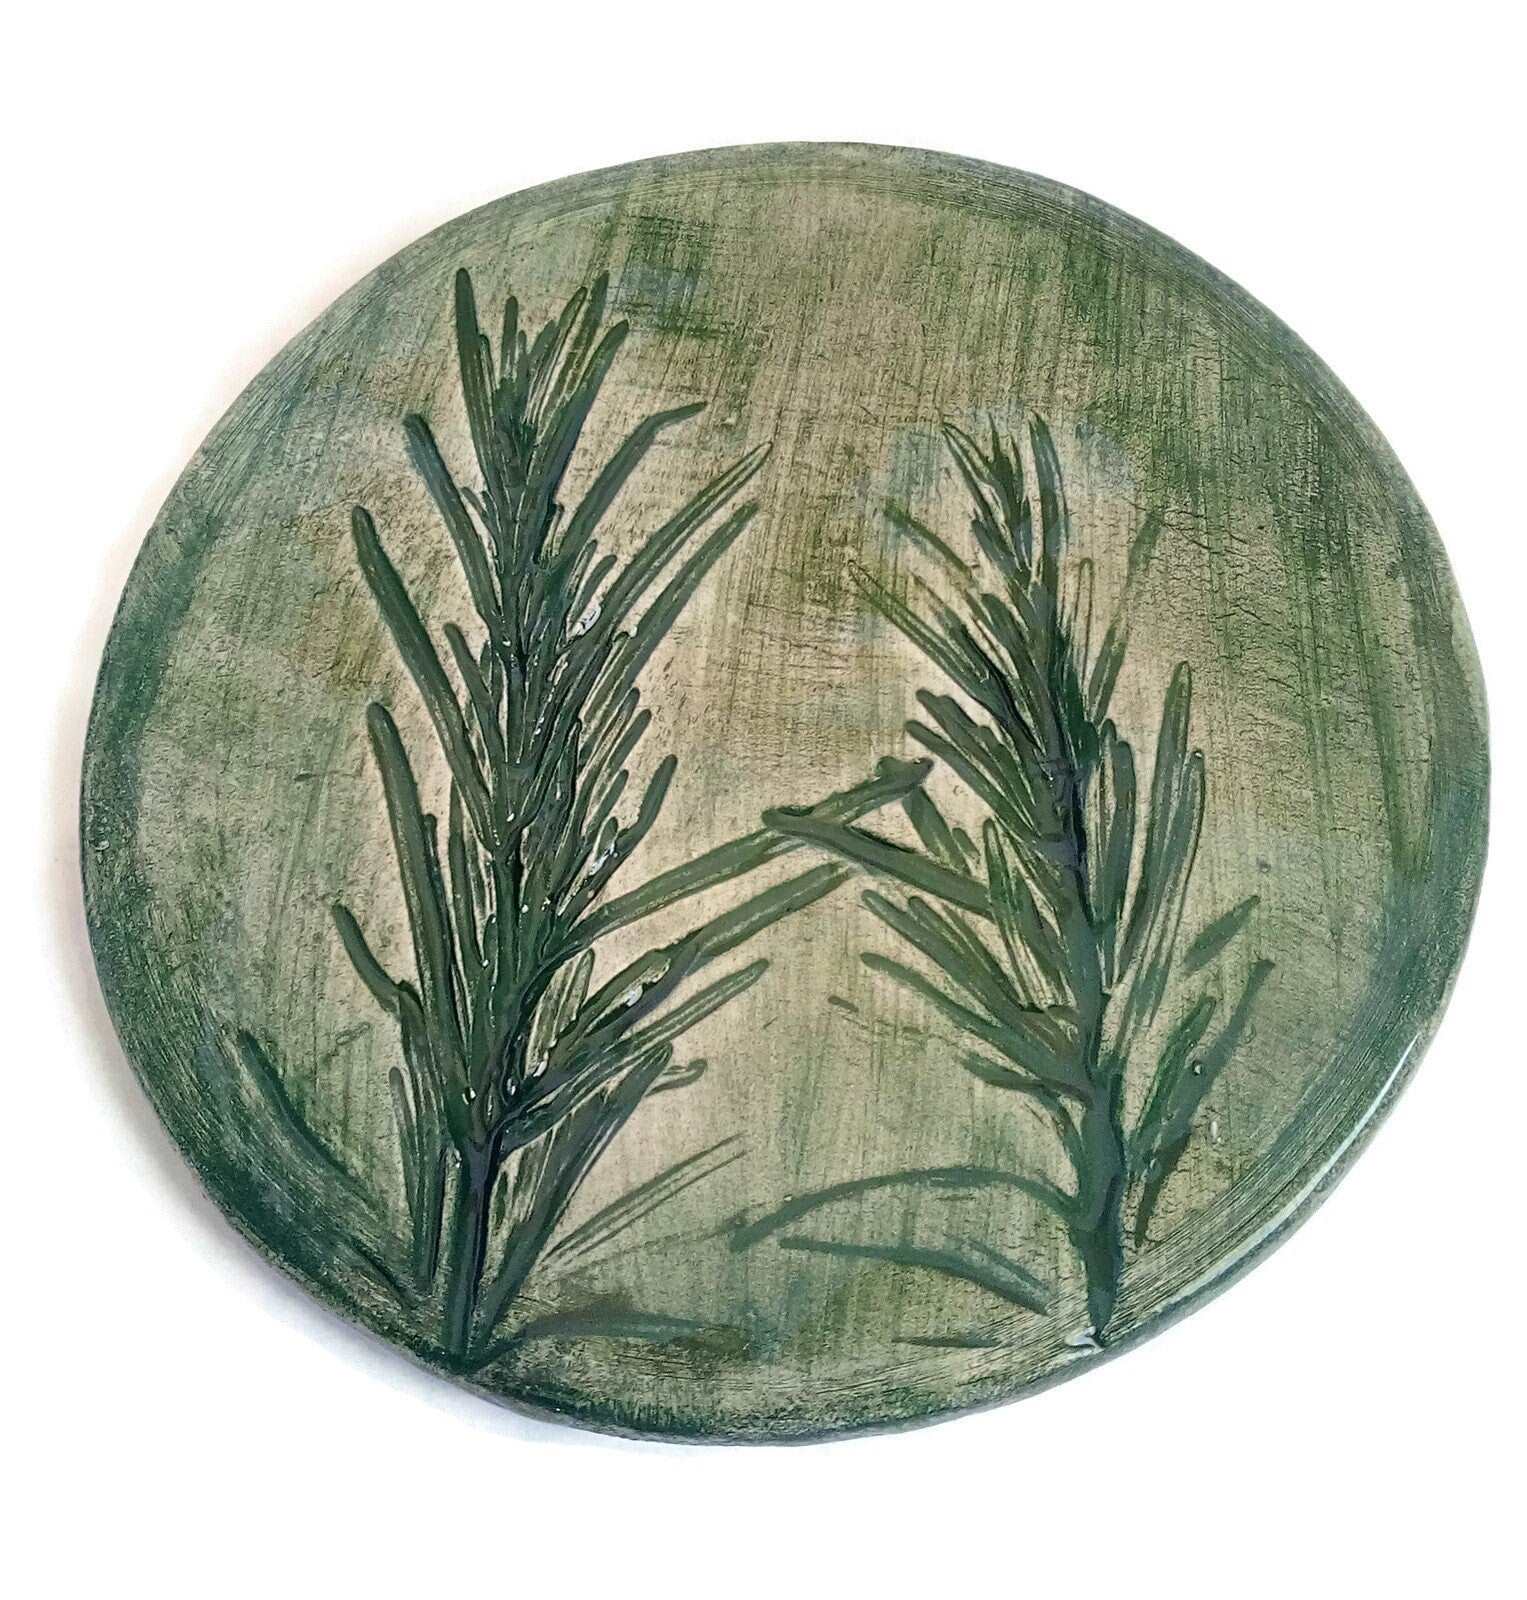 1Pc Handmade Ceramic Rustic Coasters Tile With Cork Back, Mothers Day Gift Idea, Botanical Round Coasters For Plant Lovers Artisan Pottery